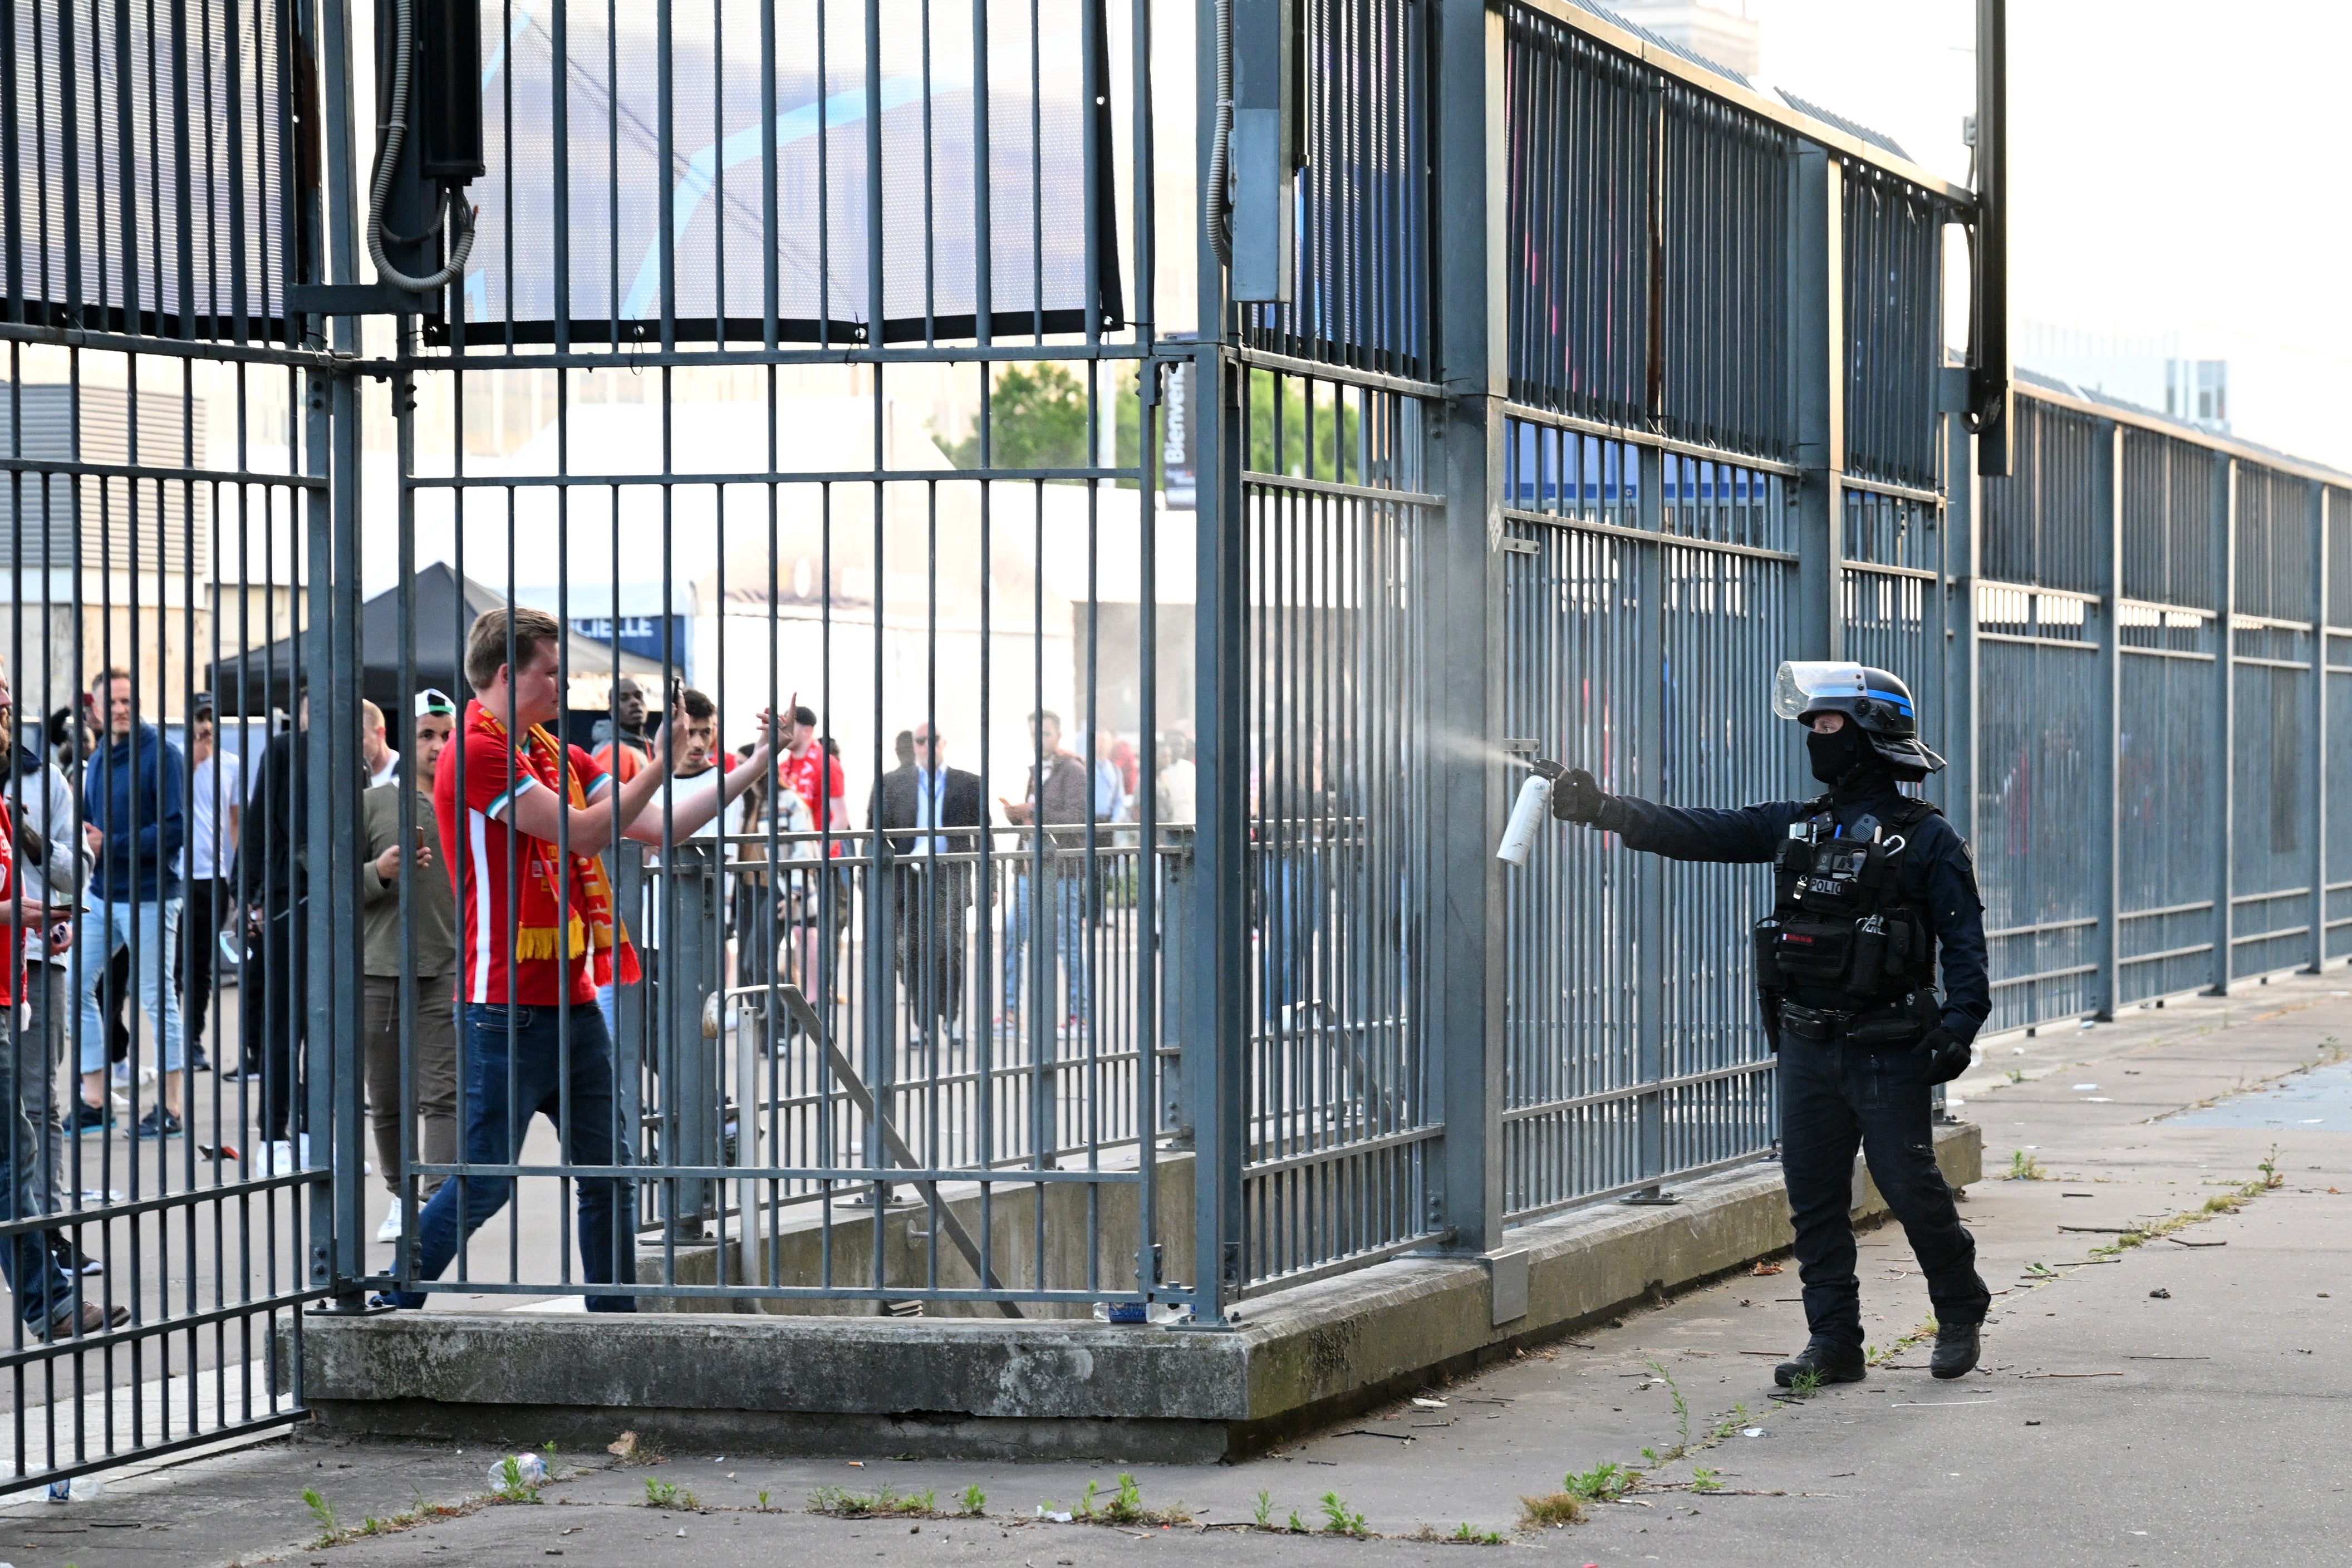 French police sprayed teargas at Liverpool fans outside the Stade de France on Saturday